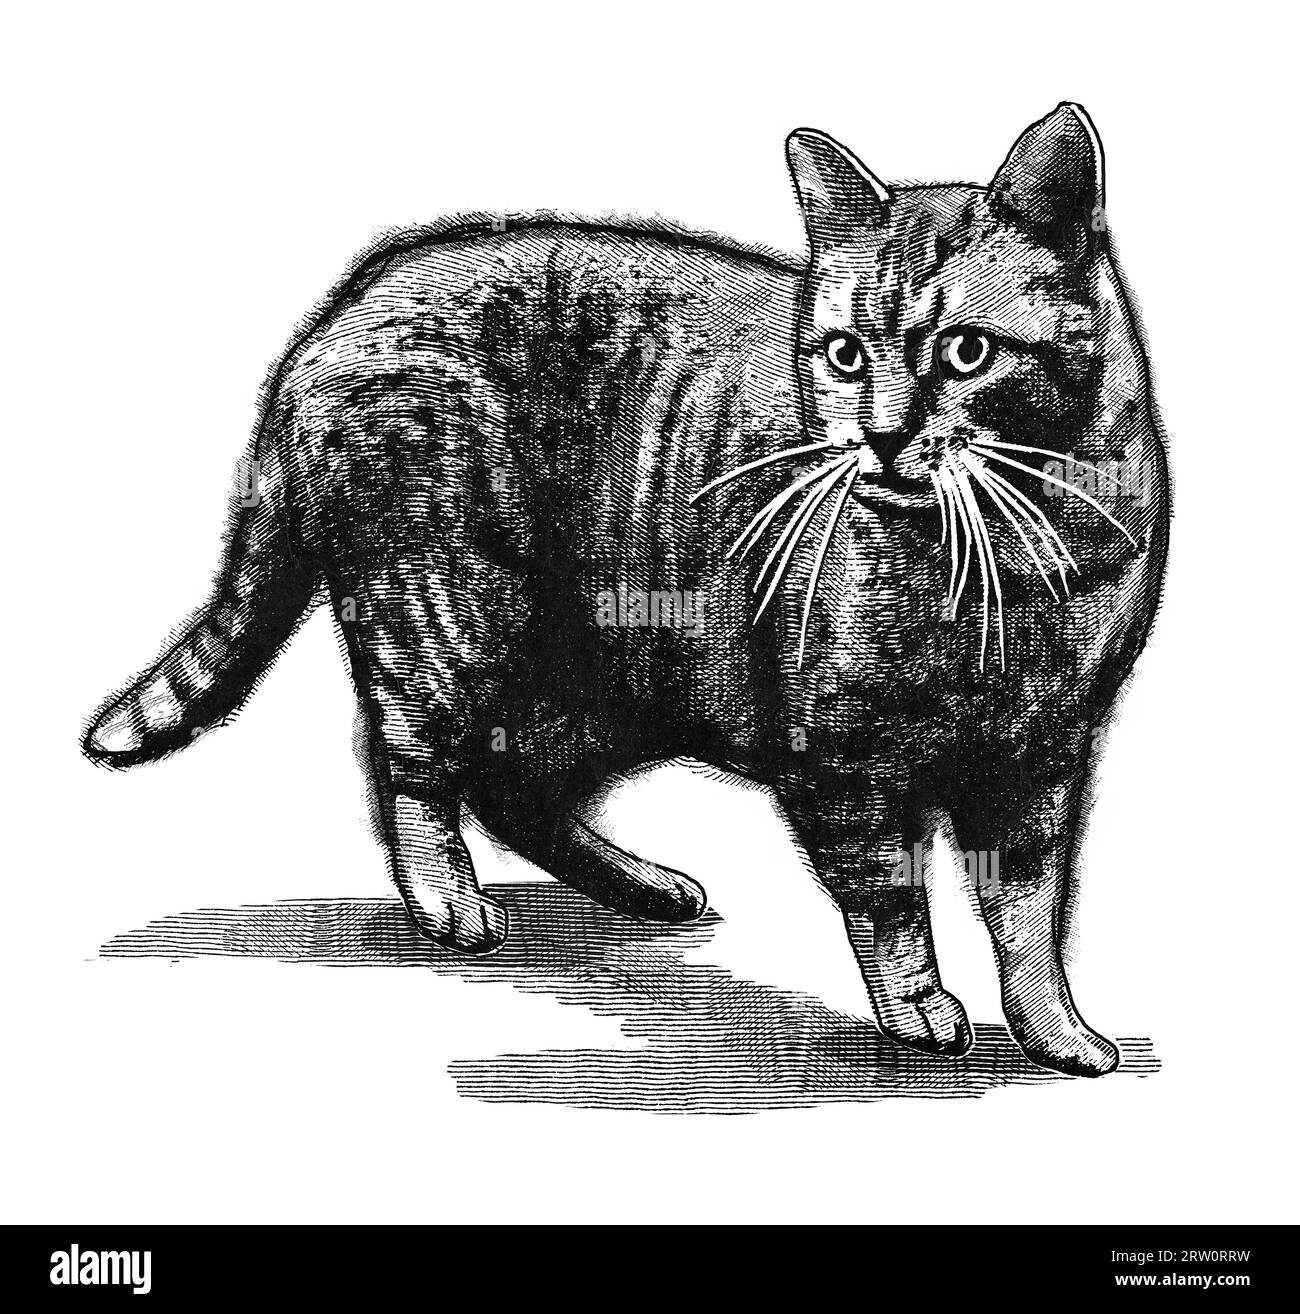 Original digital illustration of a cat, in style of old engravings Stock Photo